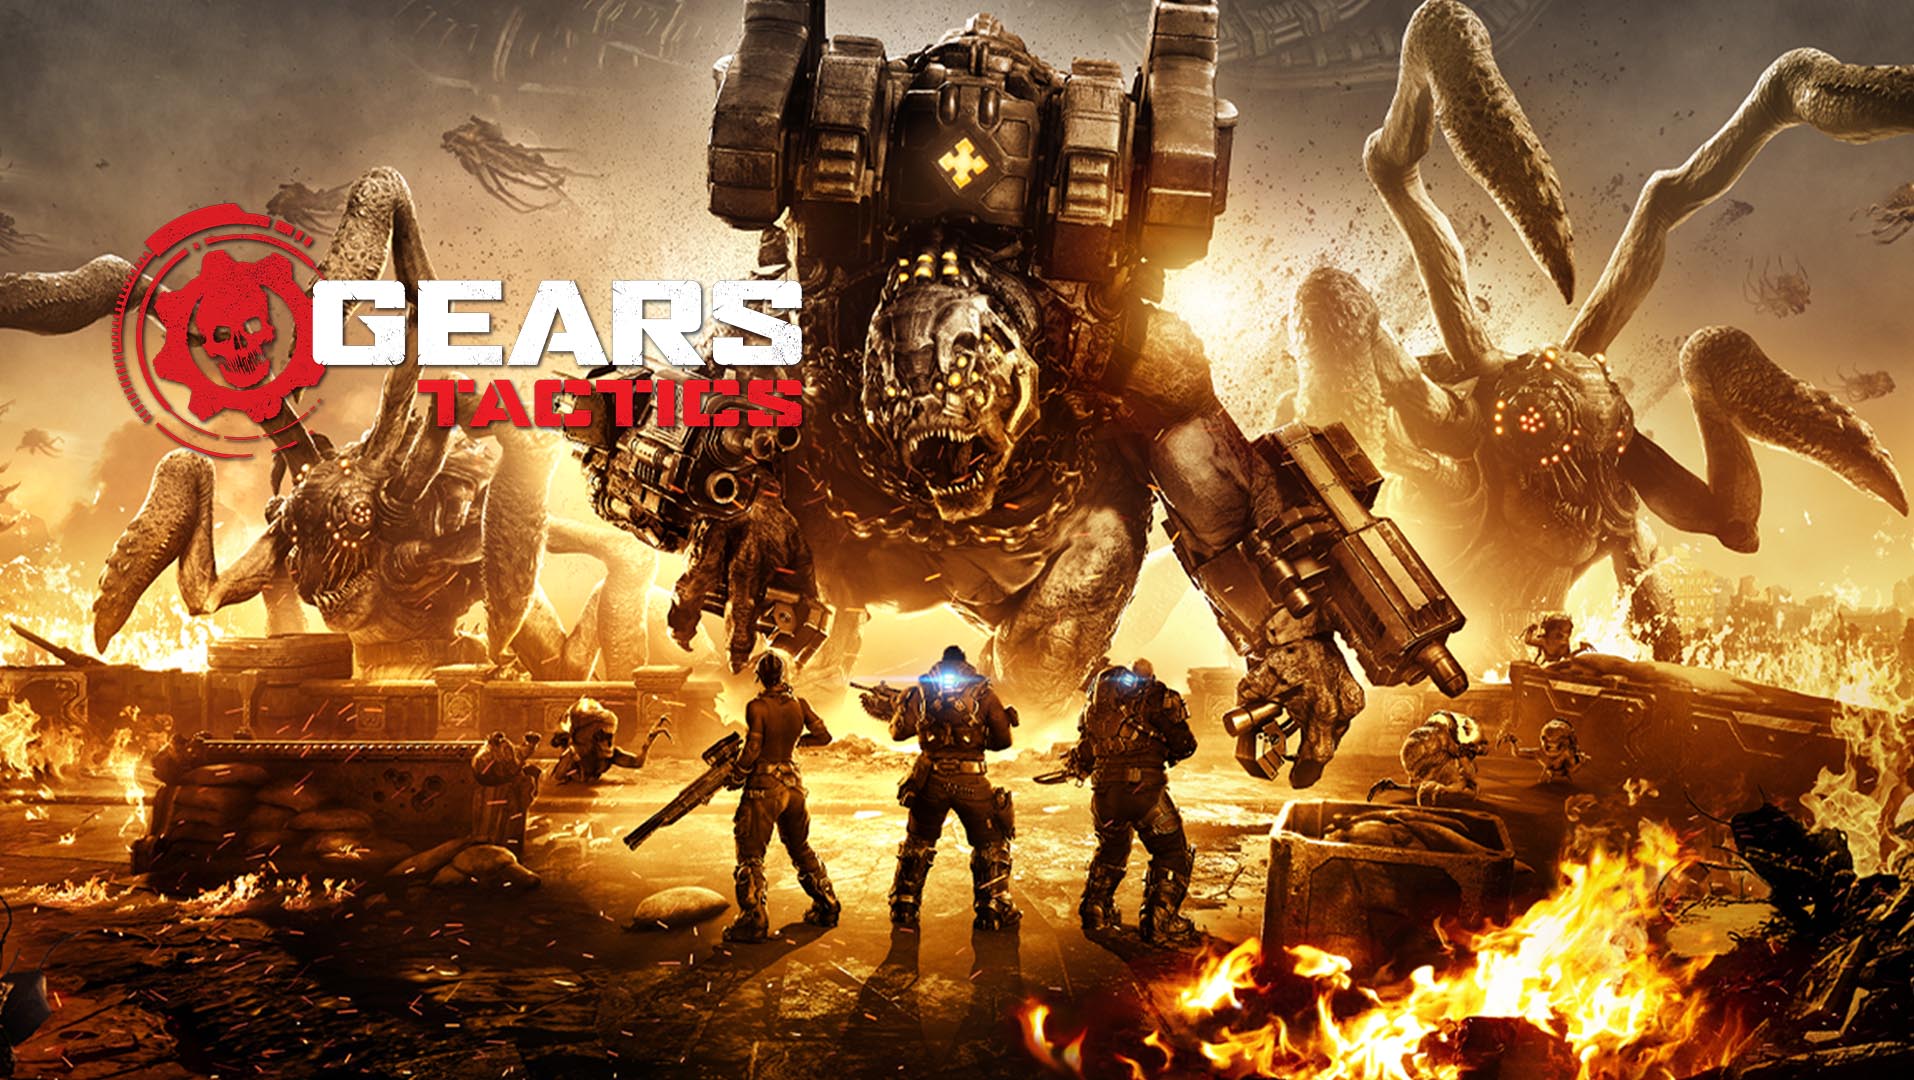 Coming in April to PC: Gears Tactics | Windows Experience Blog